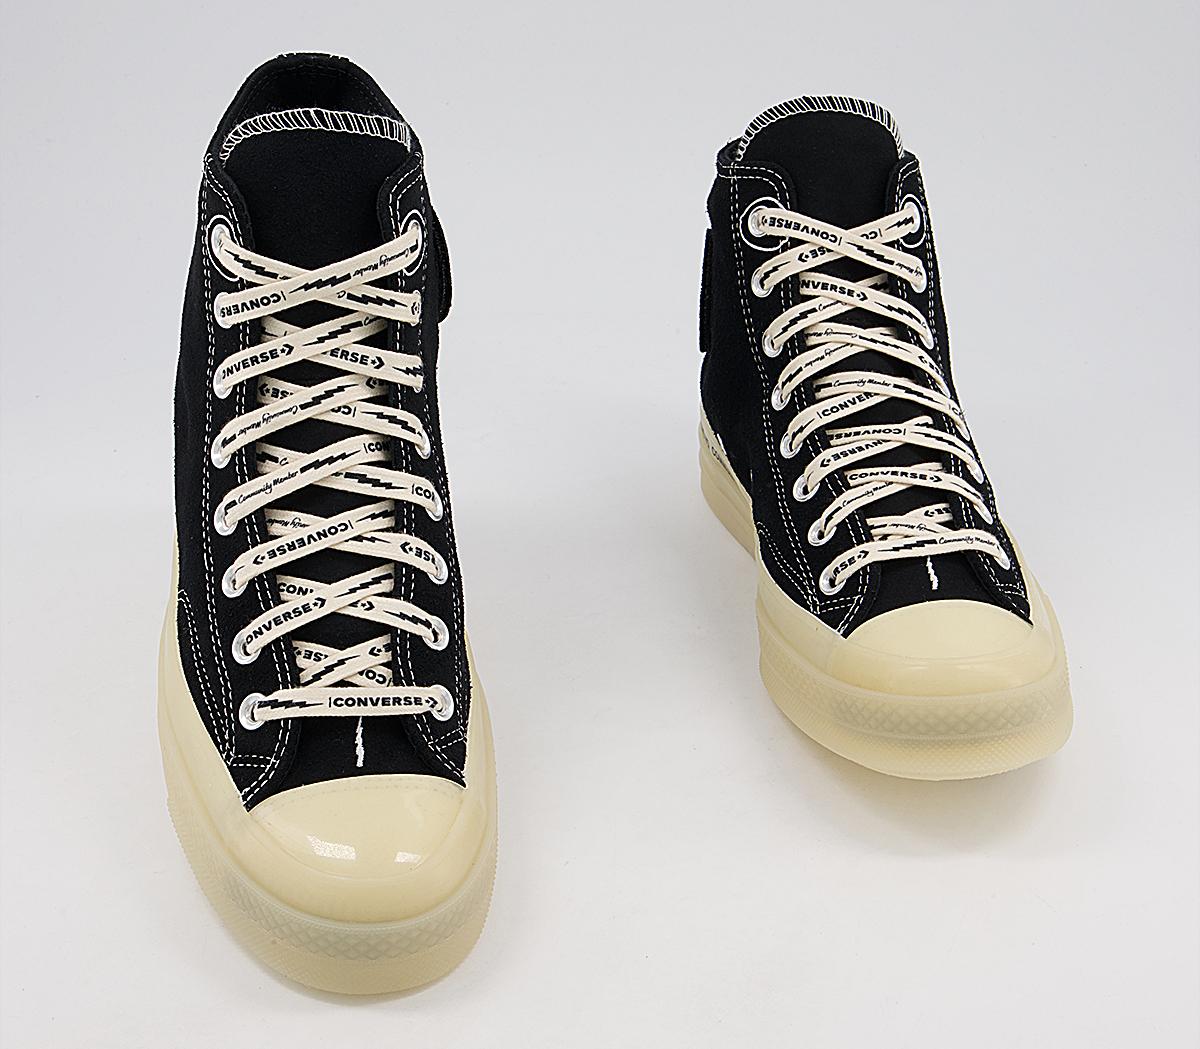 Converse All Star Hi 70s Trainers Os Comm Black - Unisex Sports